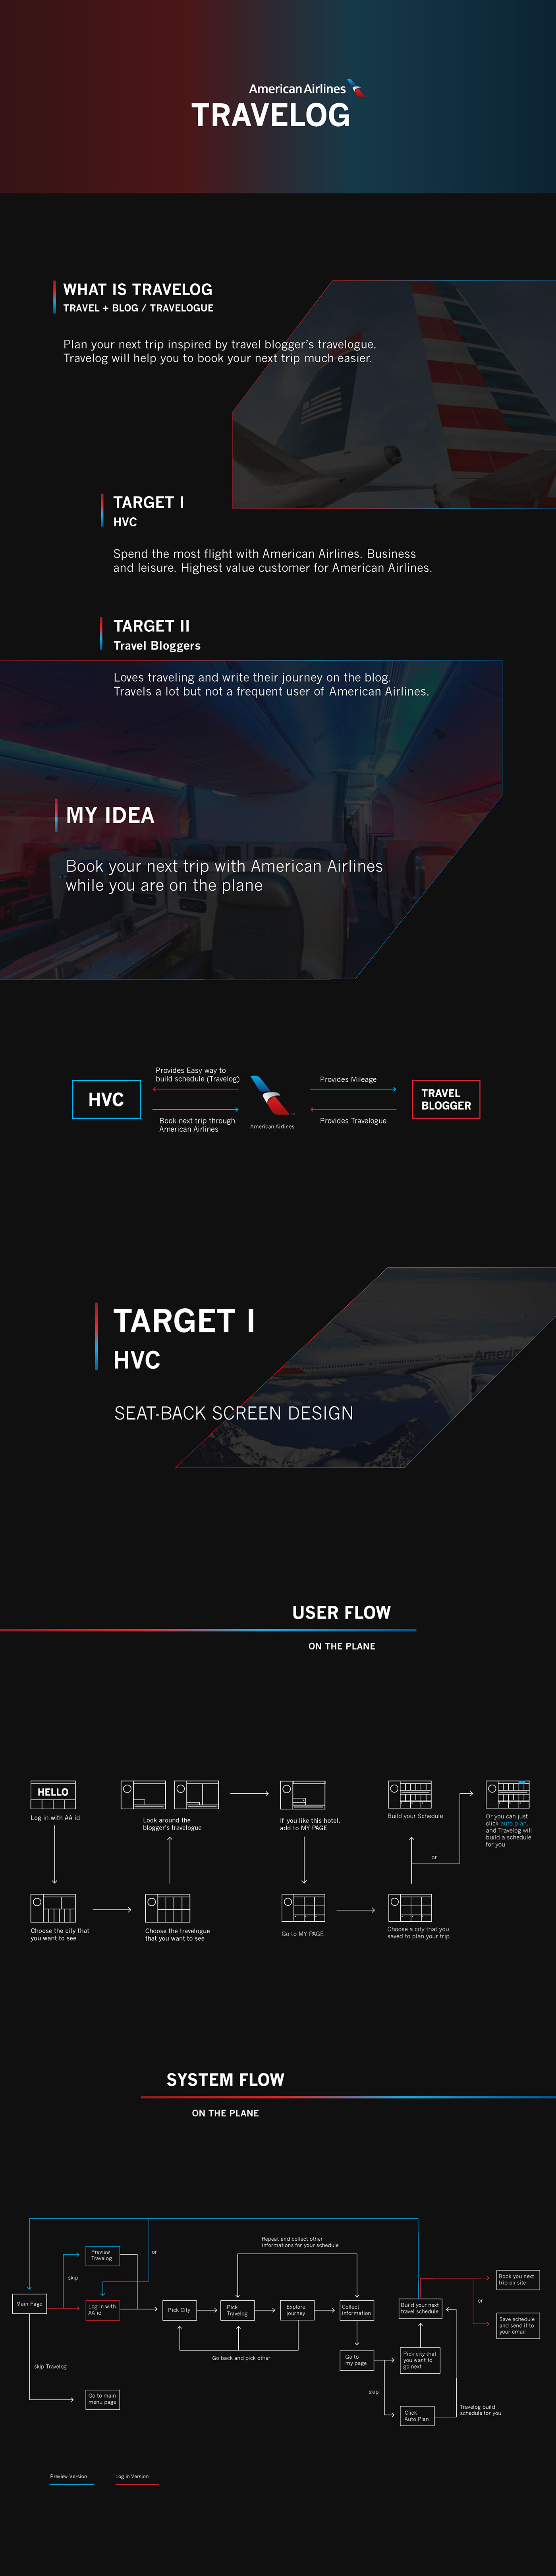 Airplane Screen trip Promotion American Airlines travelogue Seat screen ui design UX design airplane